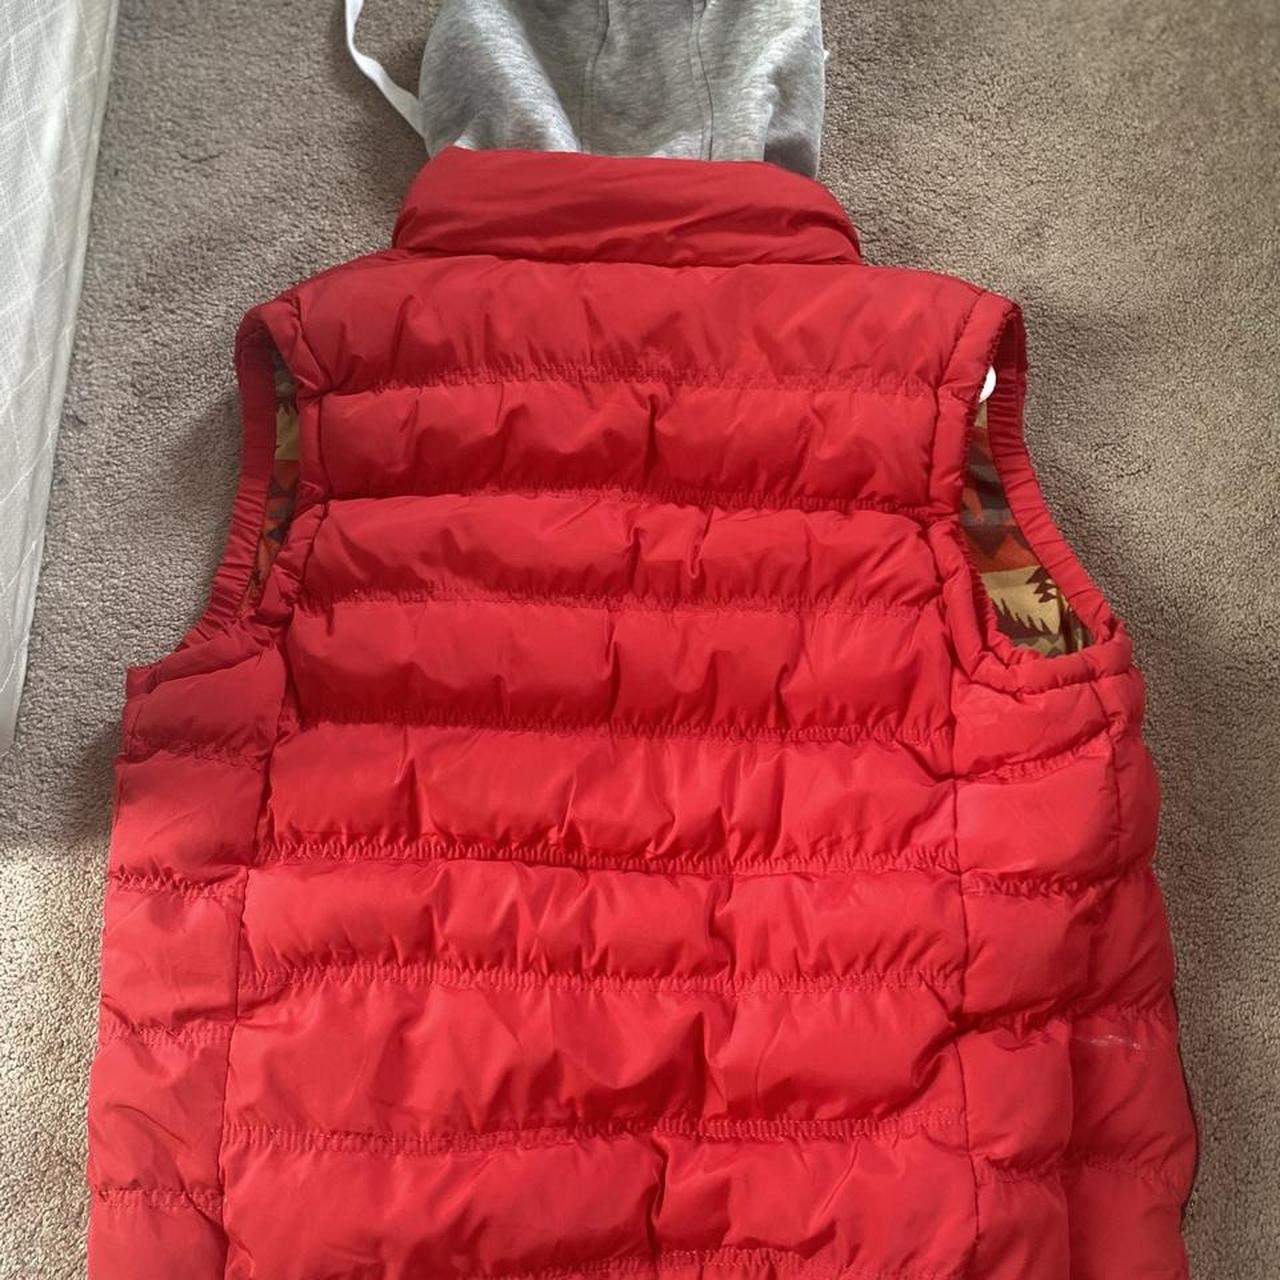 Product Image 2 - Moncler Vest, Great condition, says